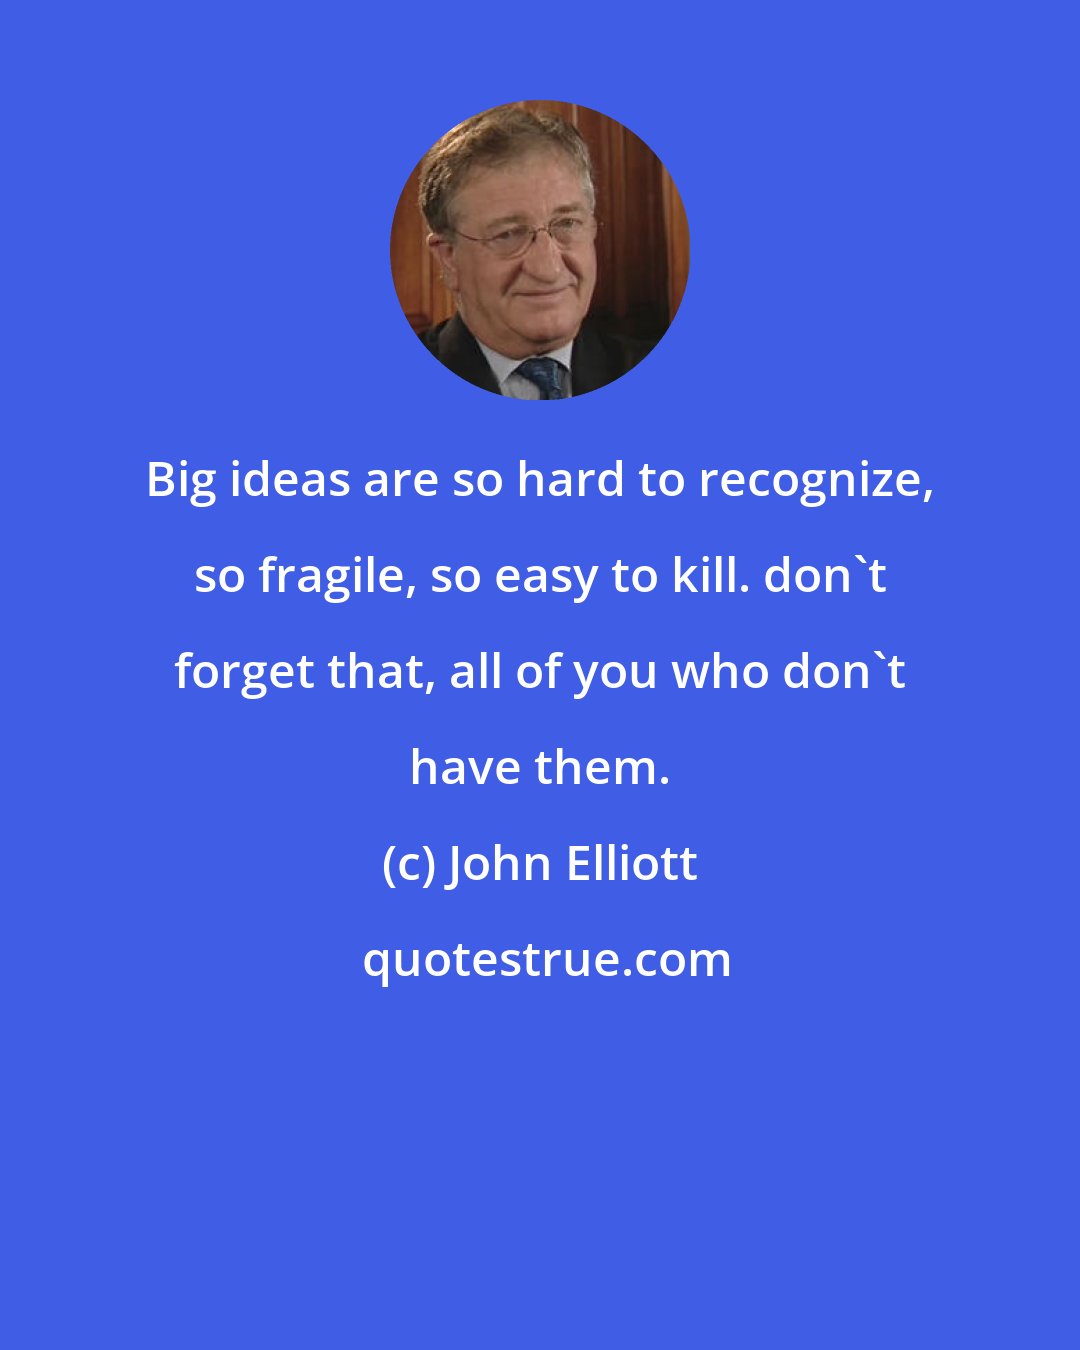 John Elliott: Big ideas are so hard to recognize, so fragile, so easy to kill. don't forget that, all of you who don't have them.